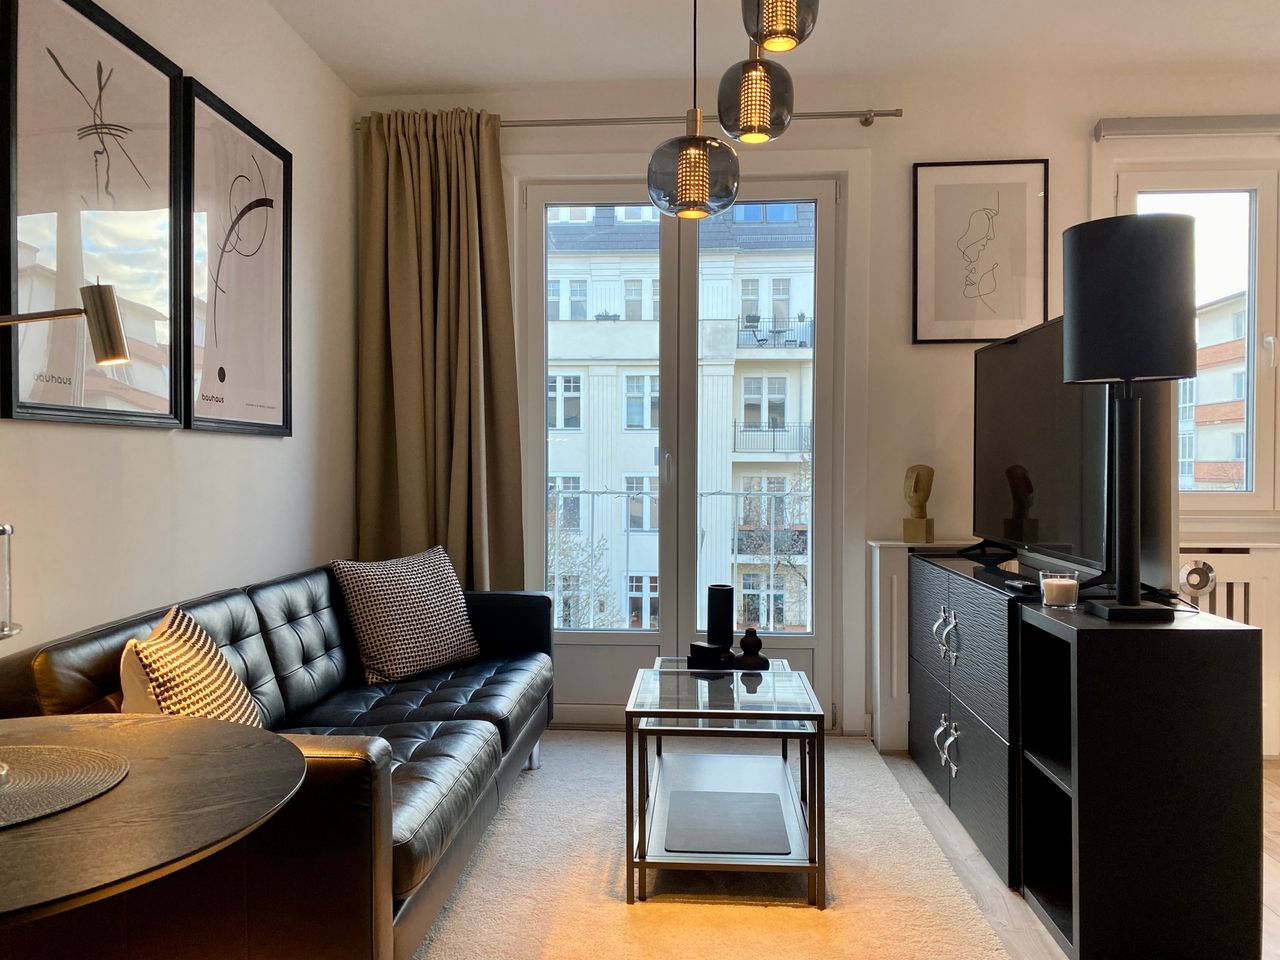 FURNISHED APARTMENT WITH CITY-WEST LIFESTYLE Schlüterstraße is one of the most sought-after residential addresses in Charlottenburg